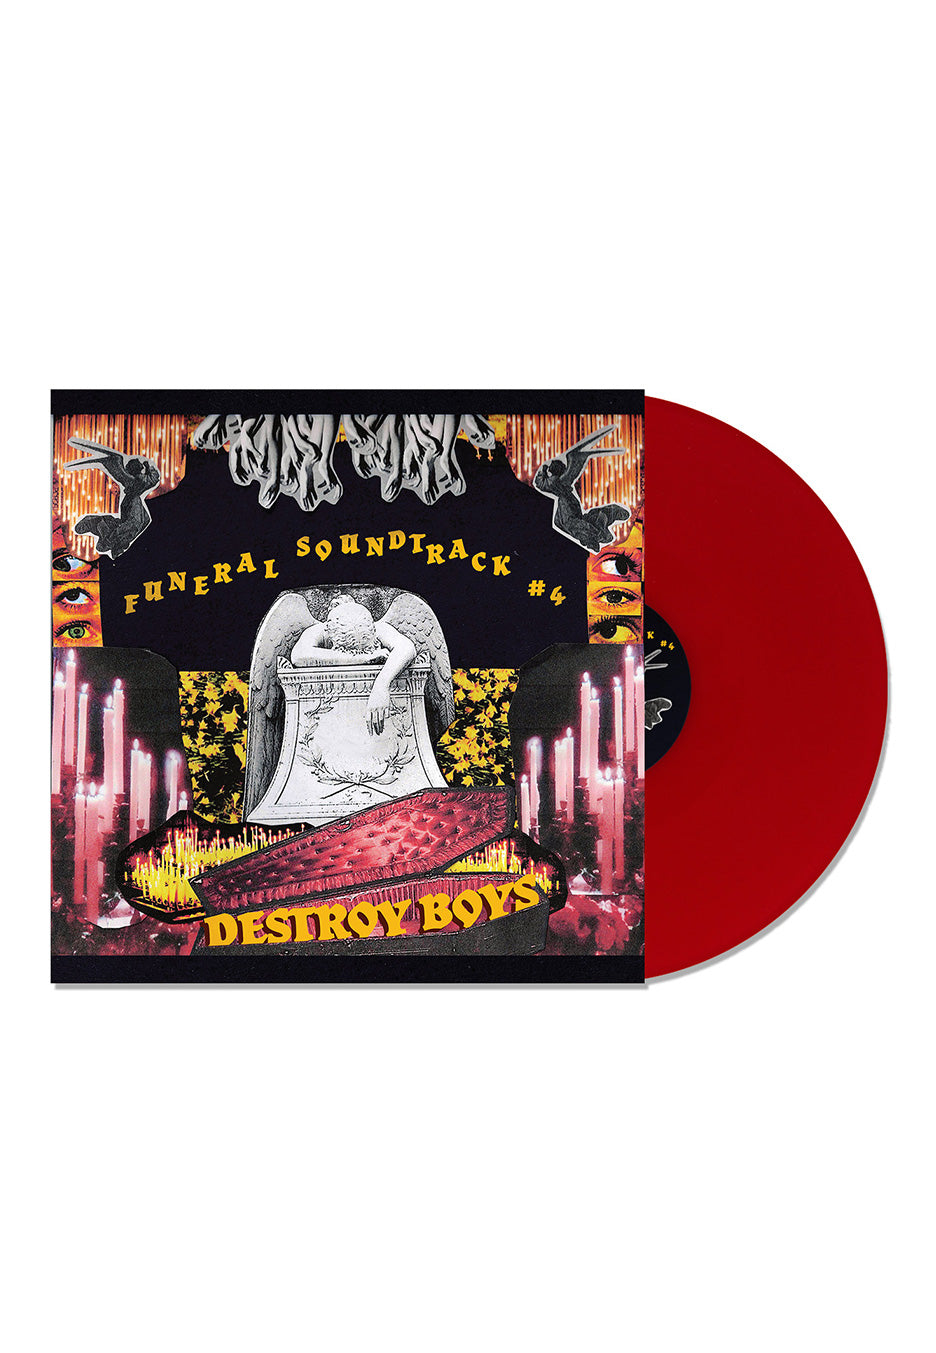 Destroy Boys - Funeral Soundtrack #4 - Opaque Red - Colored Vinyl